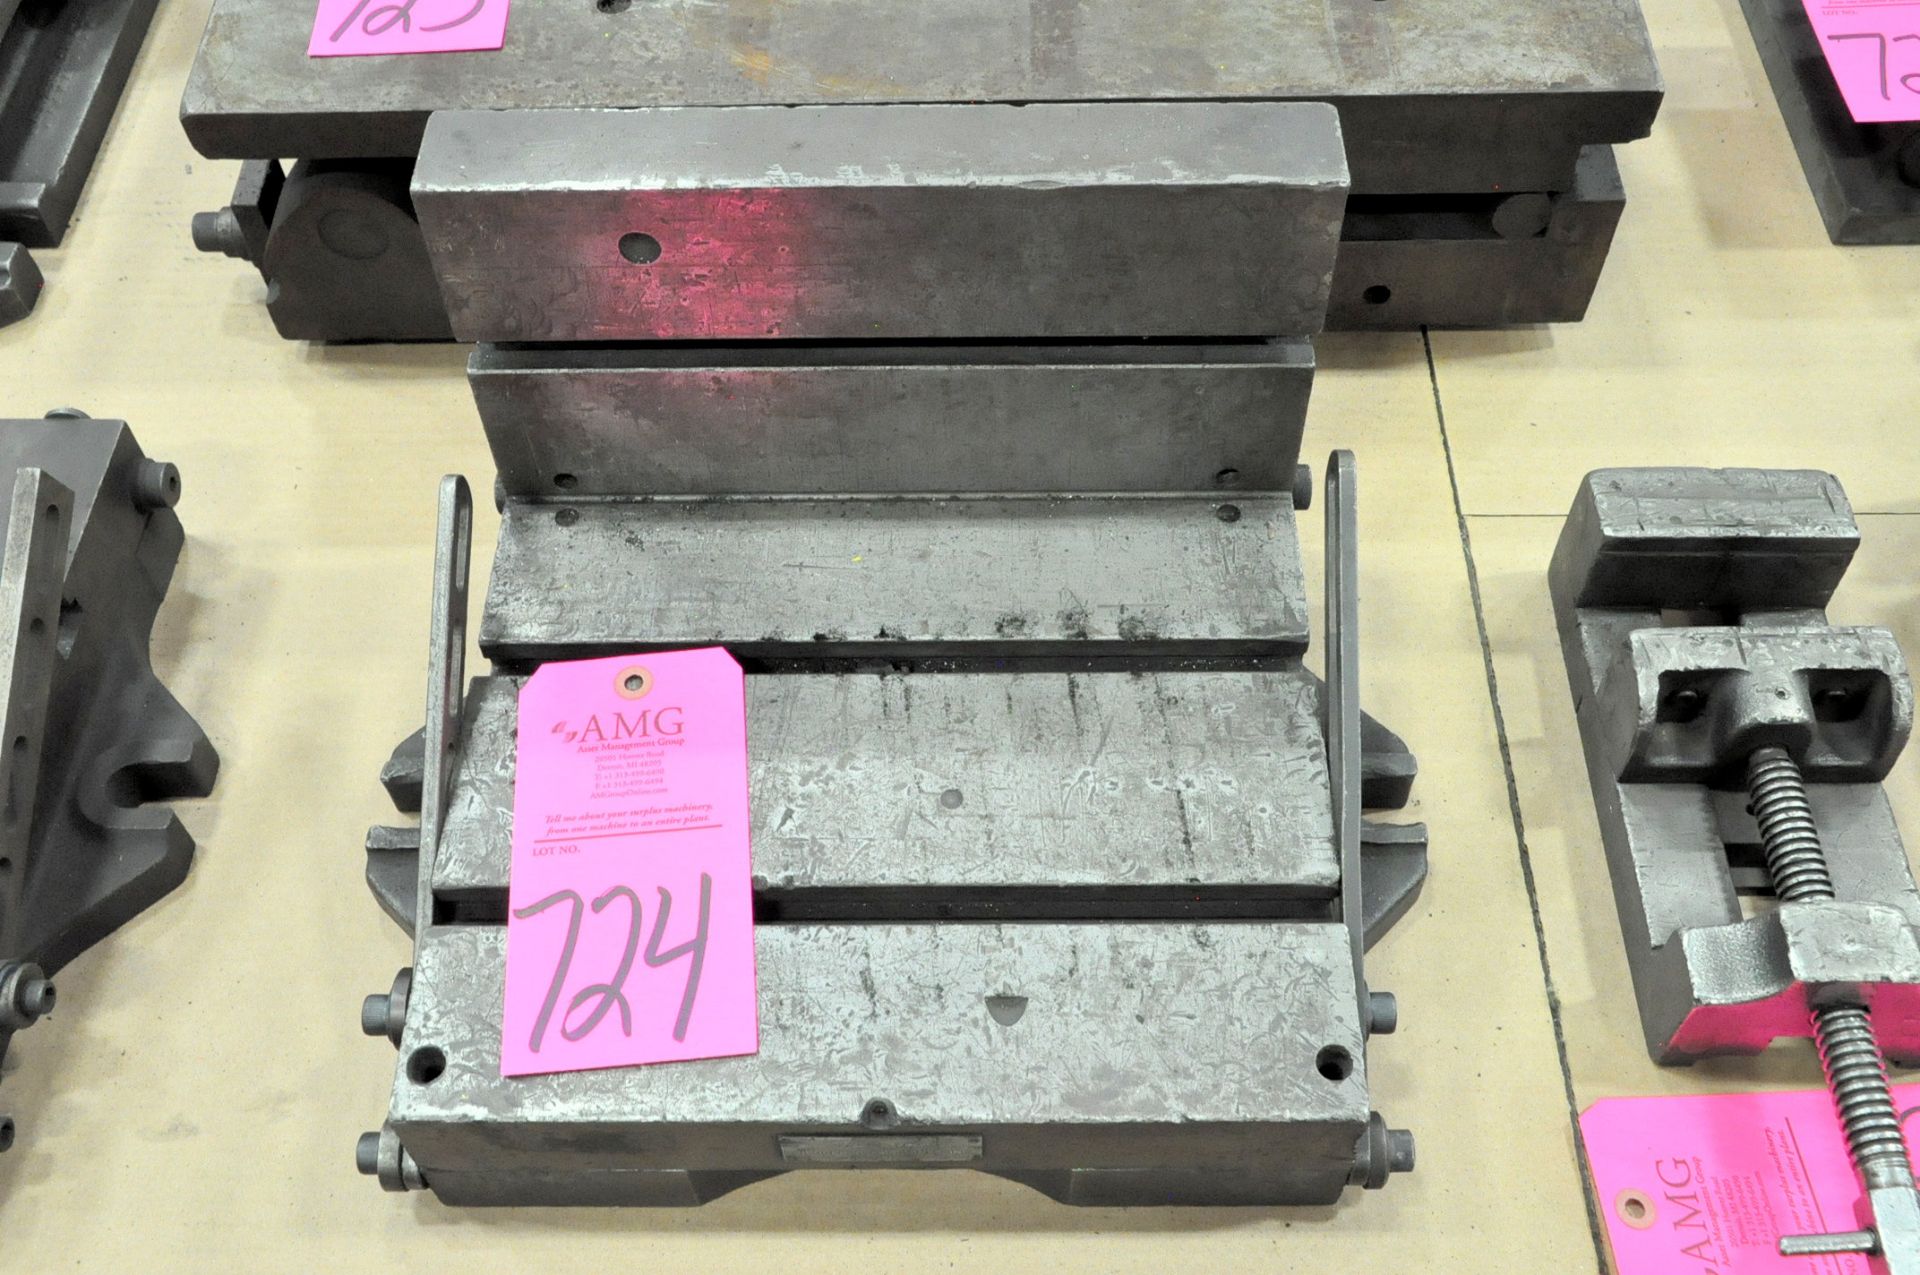 12" x 11 1/2" x 9" Inclinable Angle Plate, (E-7), (Pink Tag)